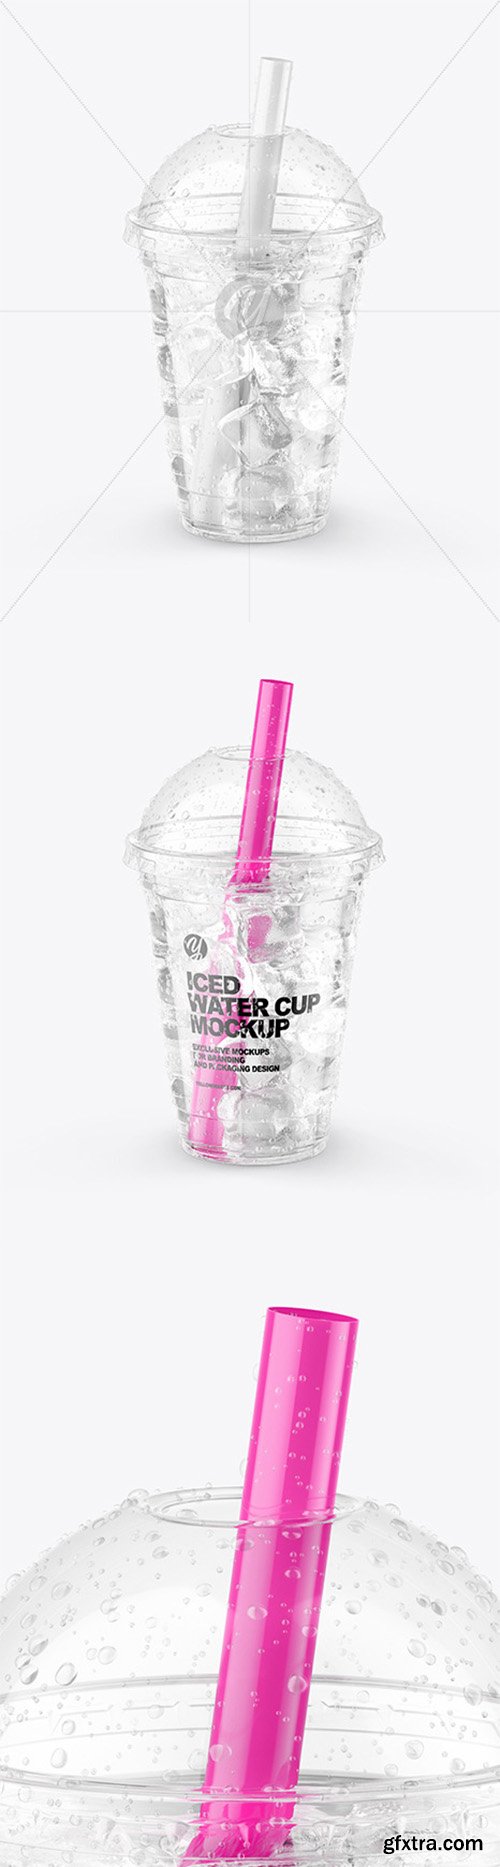 Iced Water Cup Mockup 64946